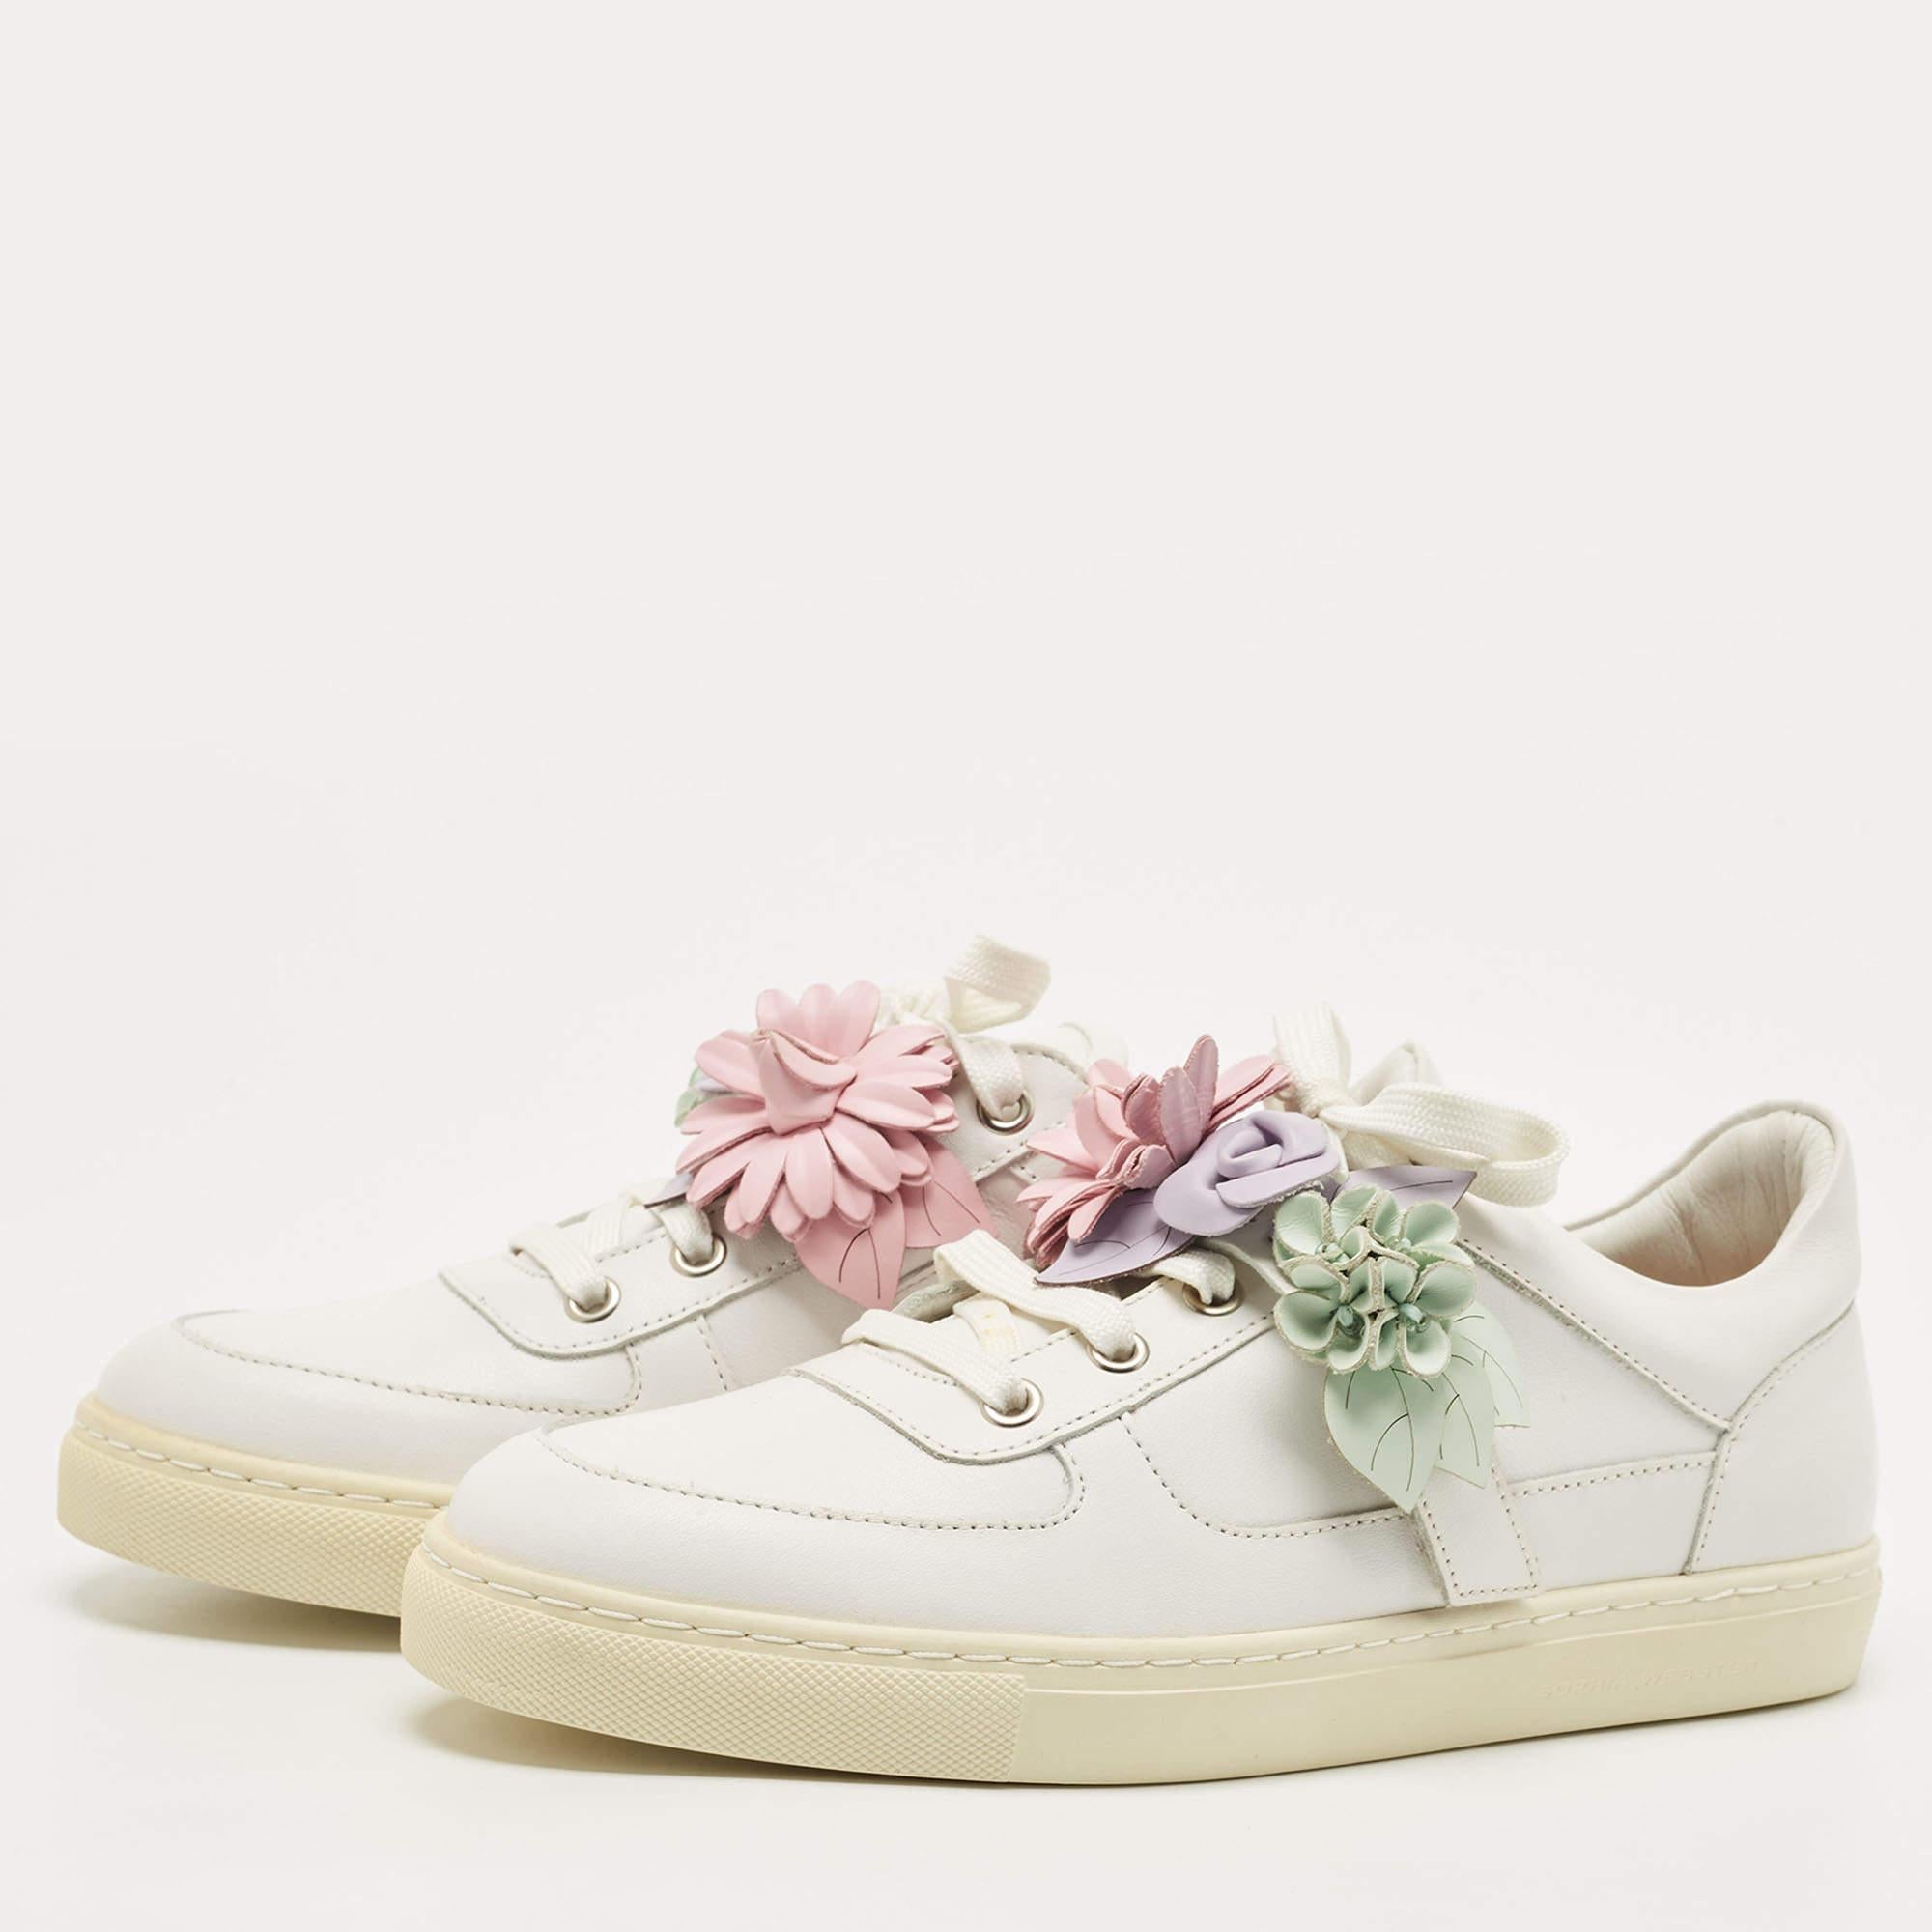 Sophia Webster White Leather Lilico Flower Low Top Sneakers Size 39 1